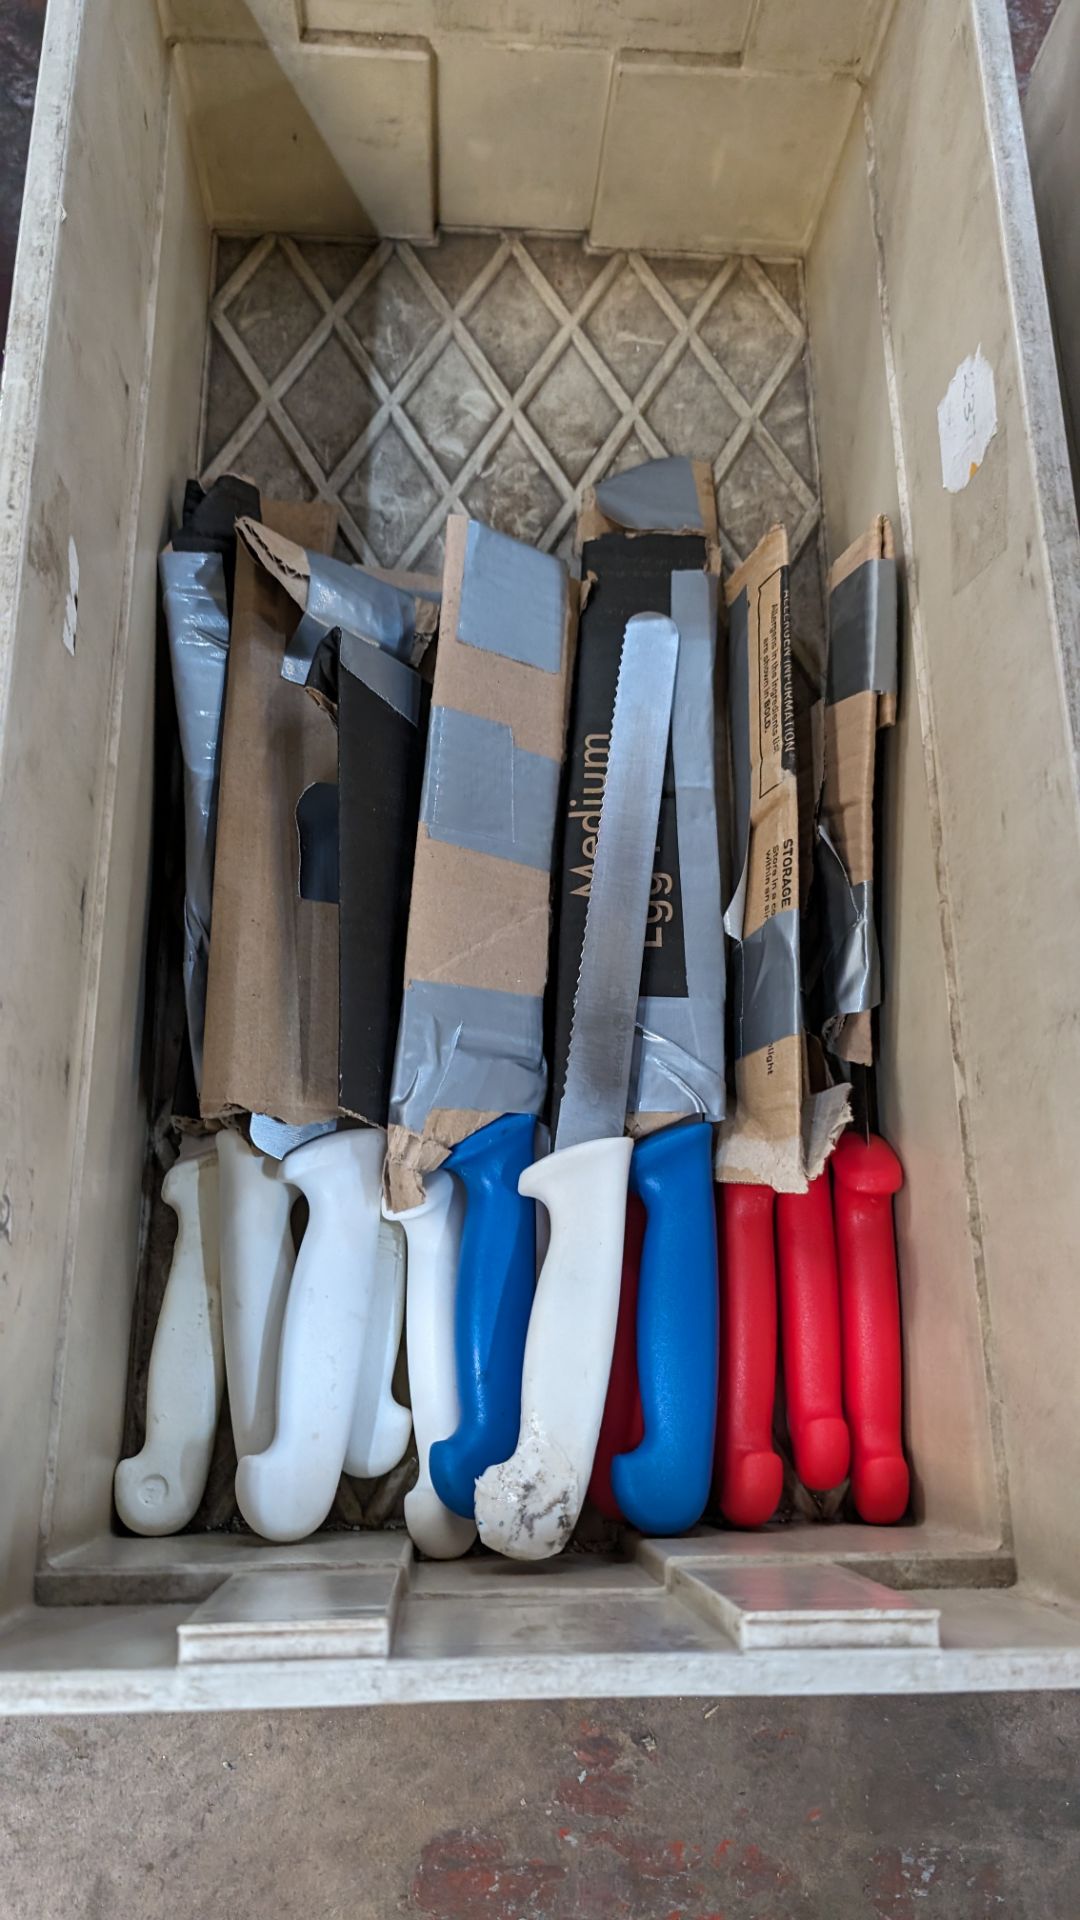 The contents of a crate of chefs knives - Image 3 of 4